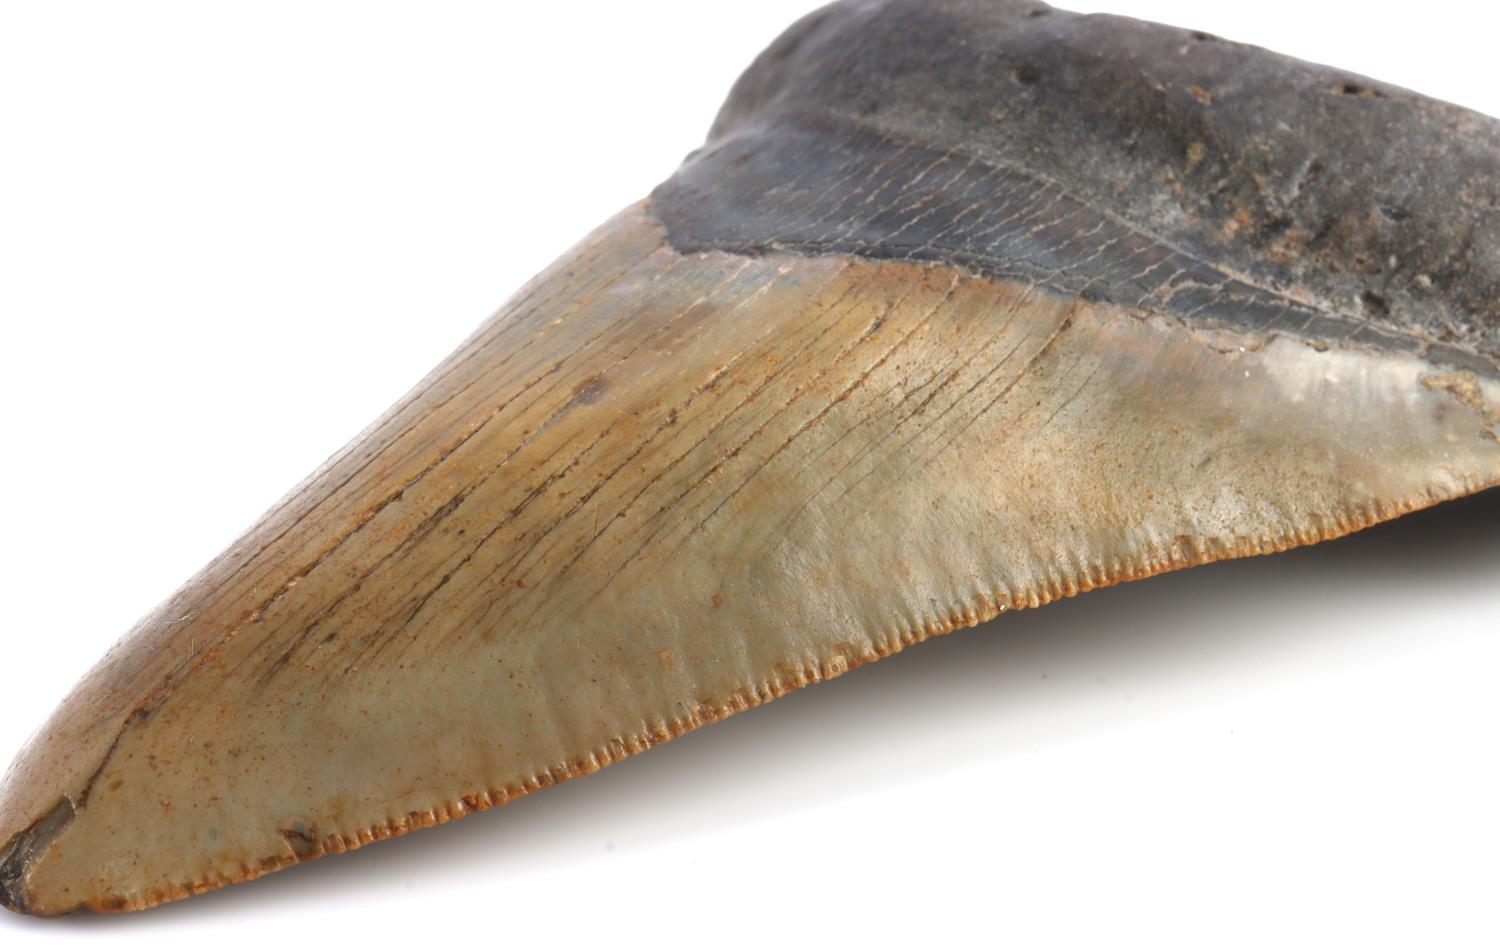 LOT OF 2 MEGALODON SHARK TOOTH MARINE FOSSIL